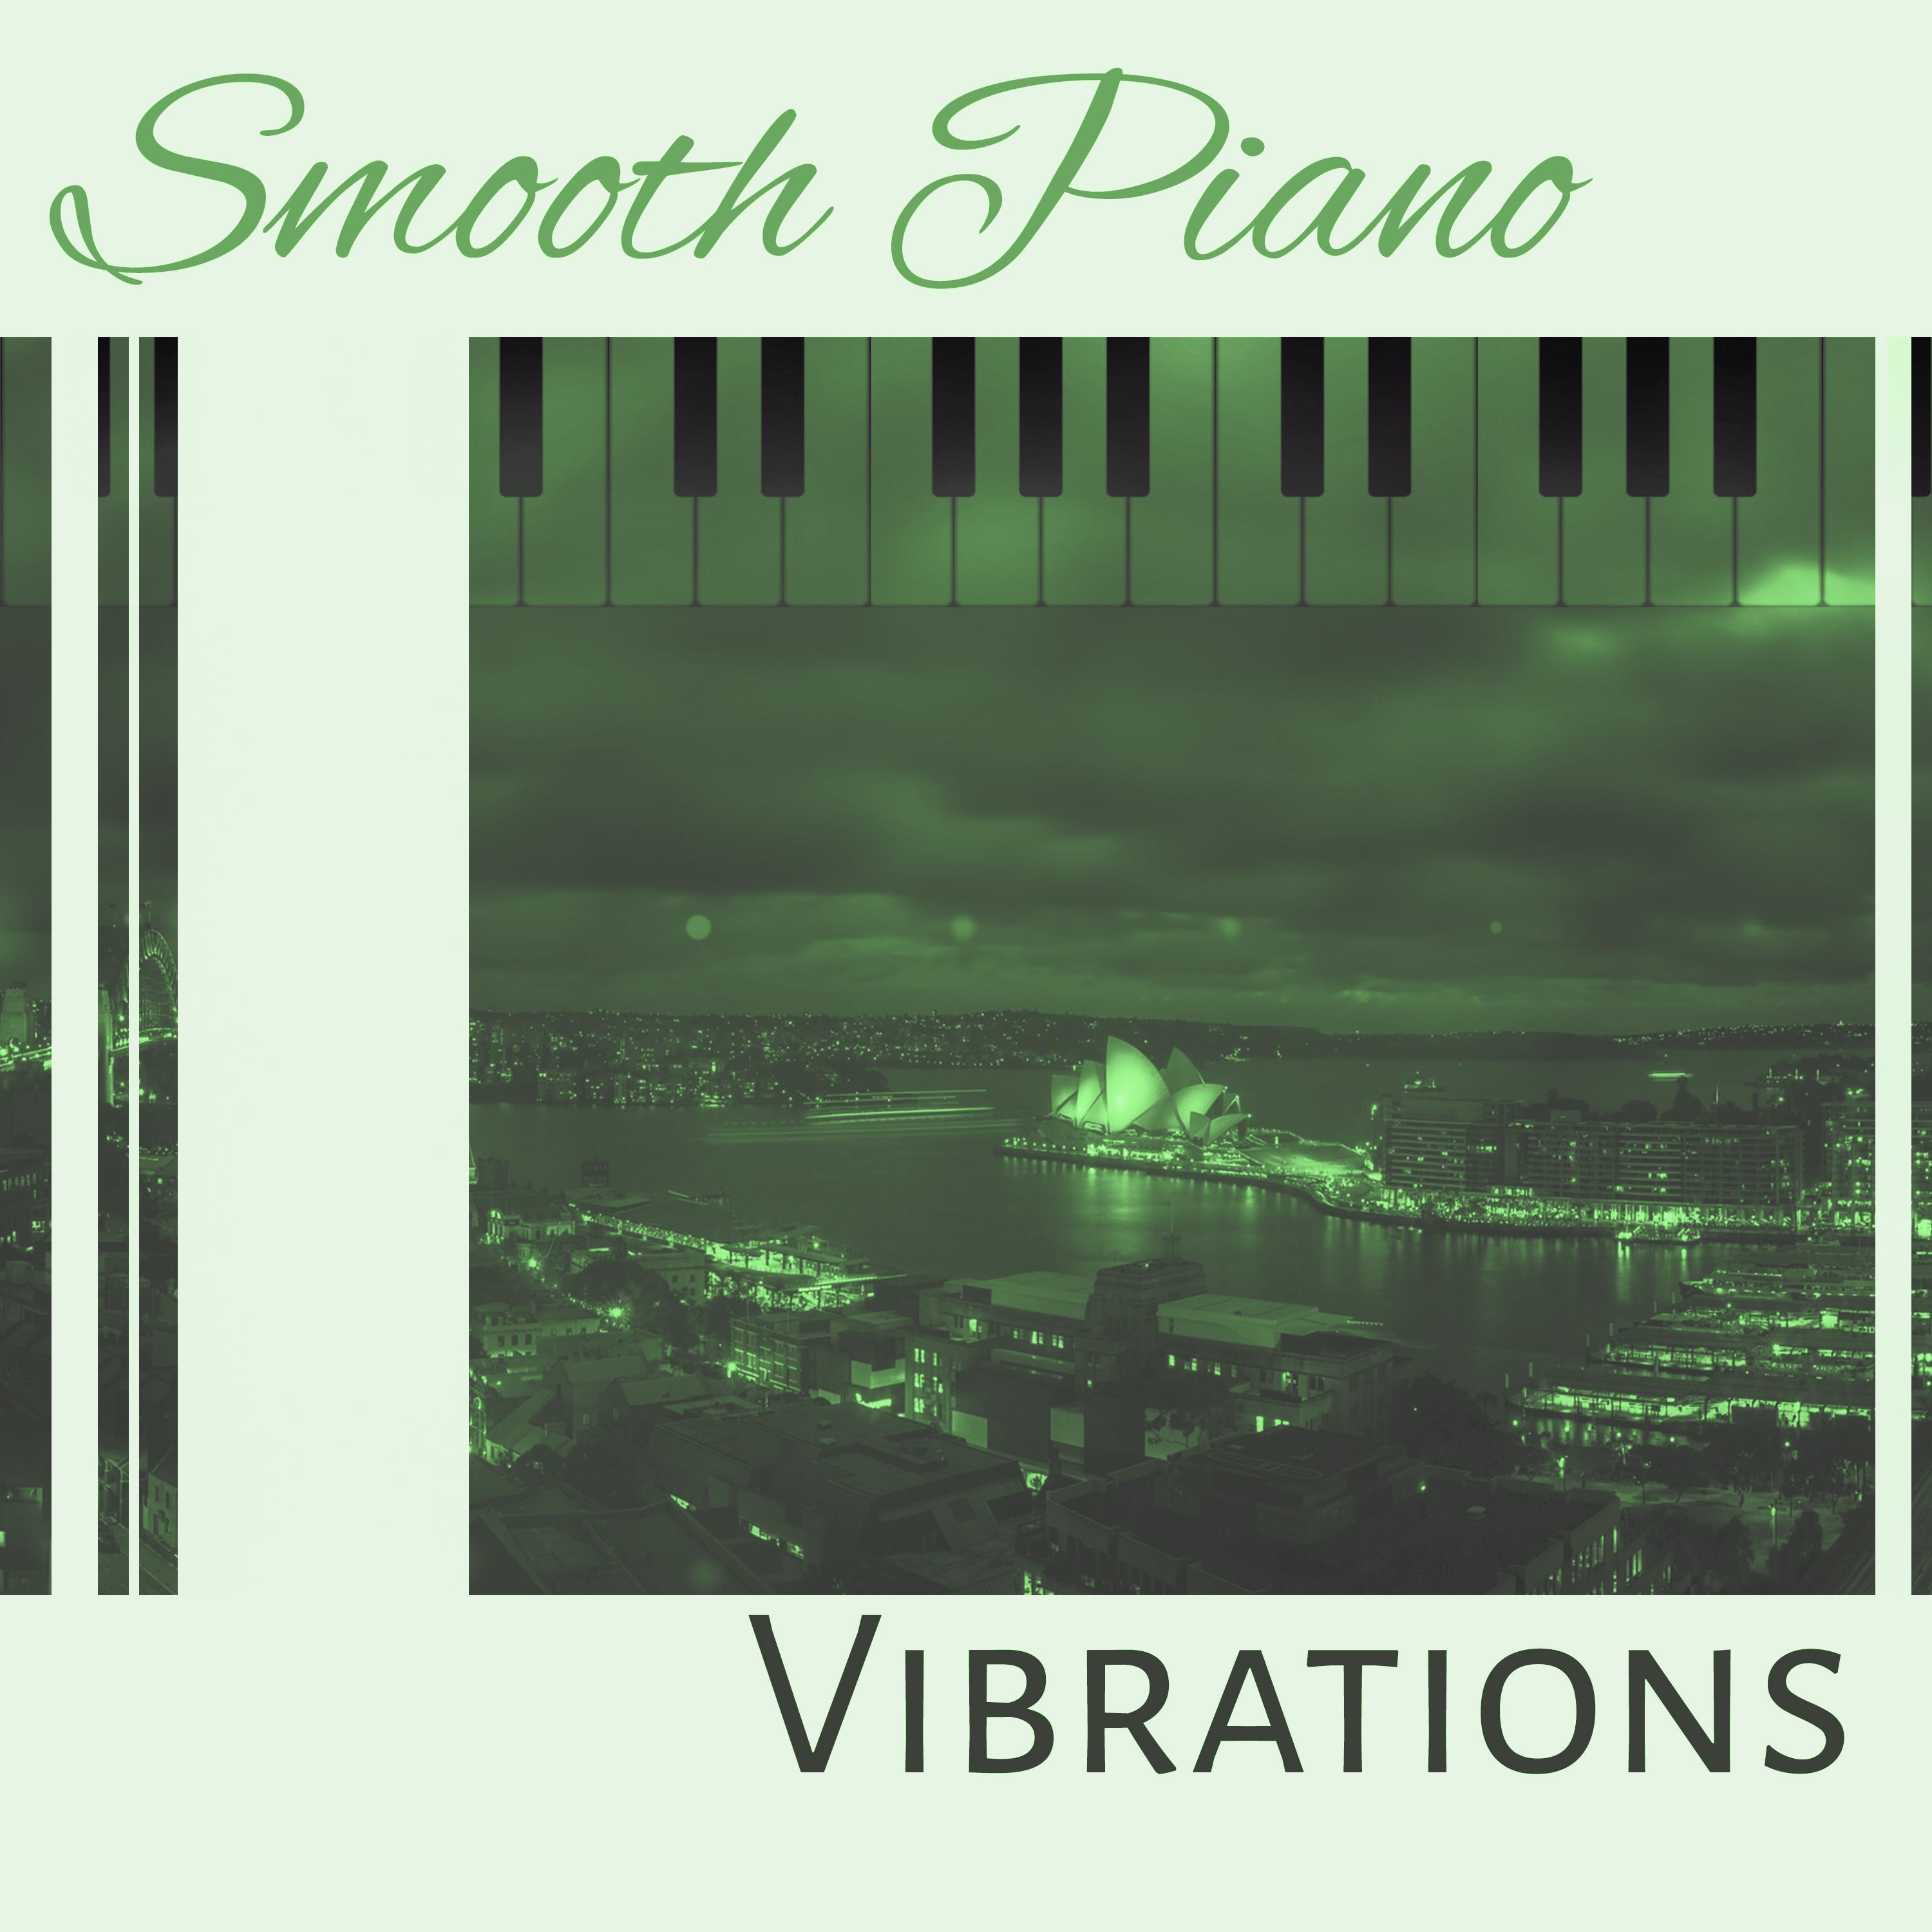 Smooth Piano Vibrations  Mellow Jazz Instrumental,  Lovely Songs, Simple Piano